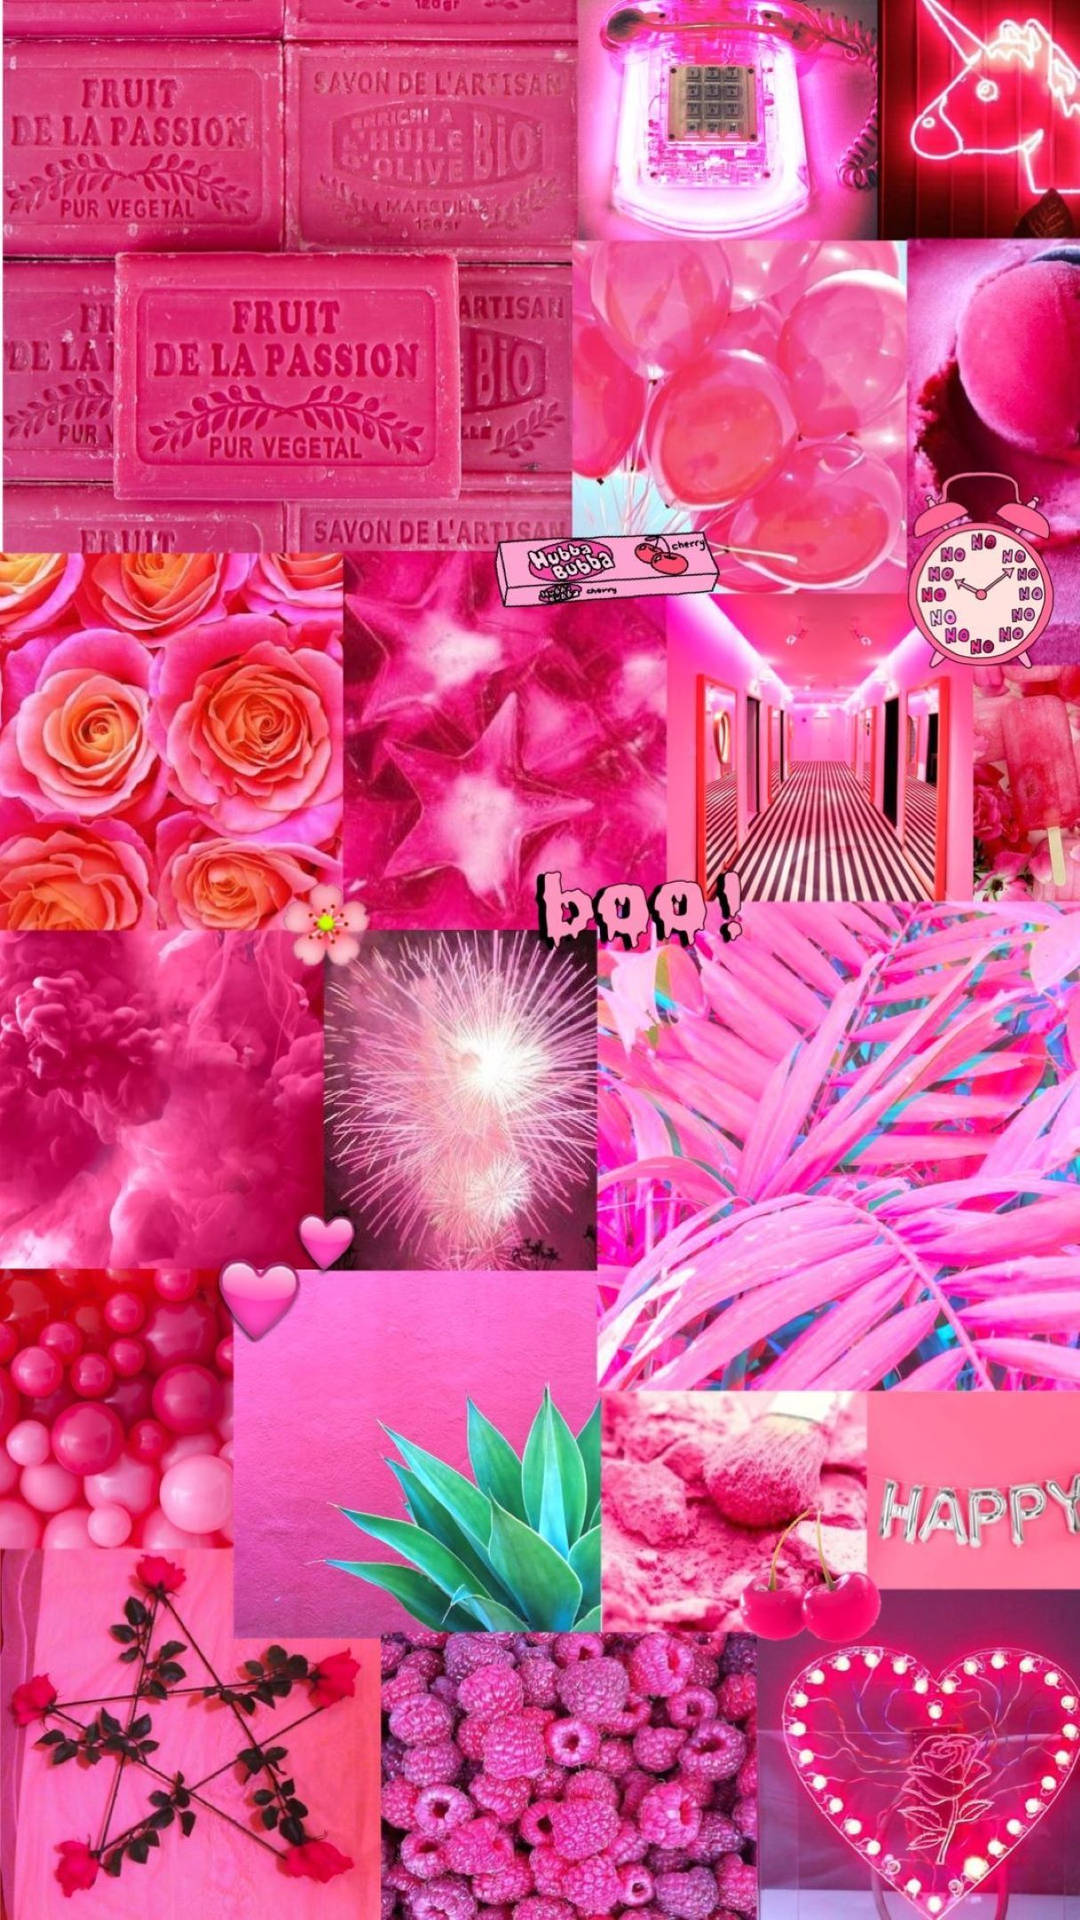 Neon Pink Aesthetic Collage Wallpaper